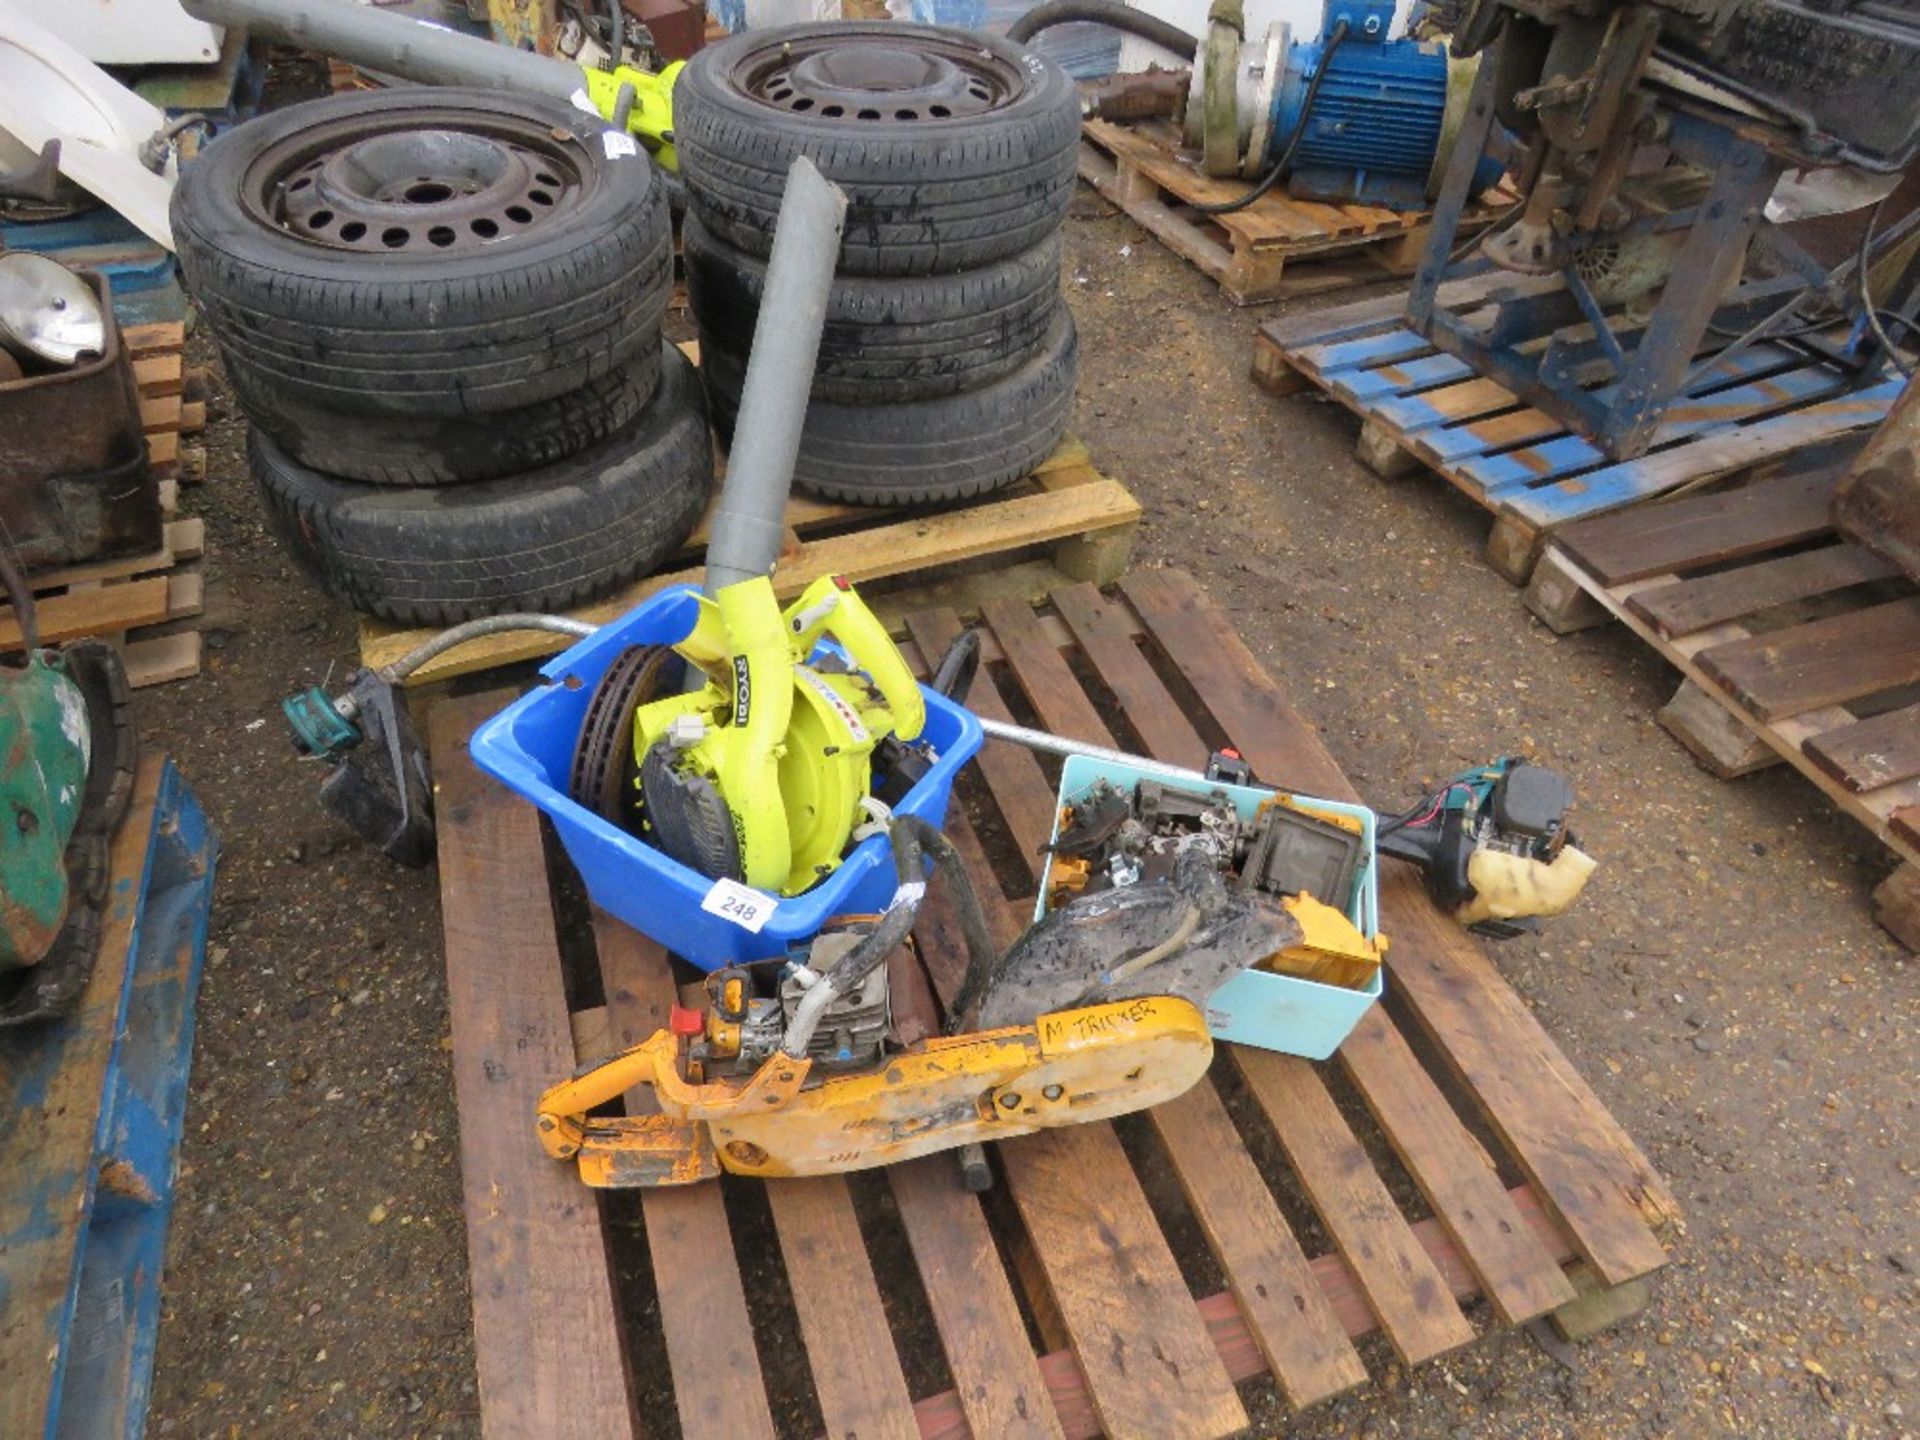 STRIMMER PLUS ASSORTED PETROL SAW PARTS. THIS LOT IS SOLD UNDER THE AUCTIONEERS MARGIN SCHEME, TH